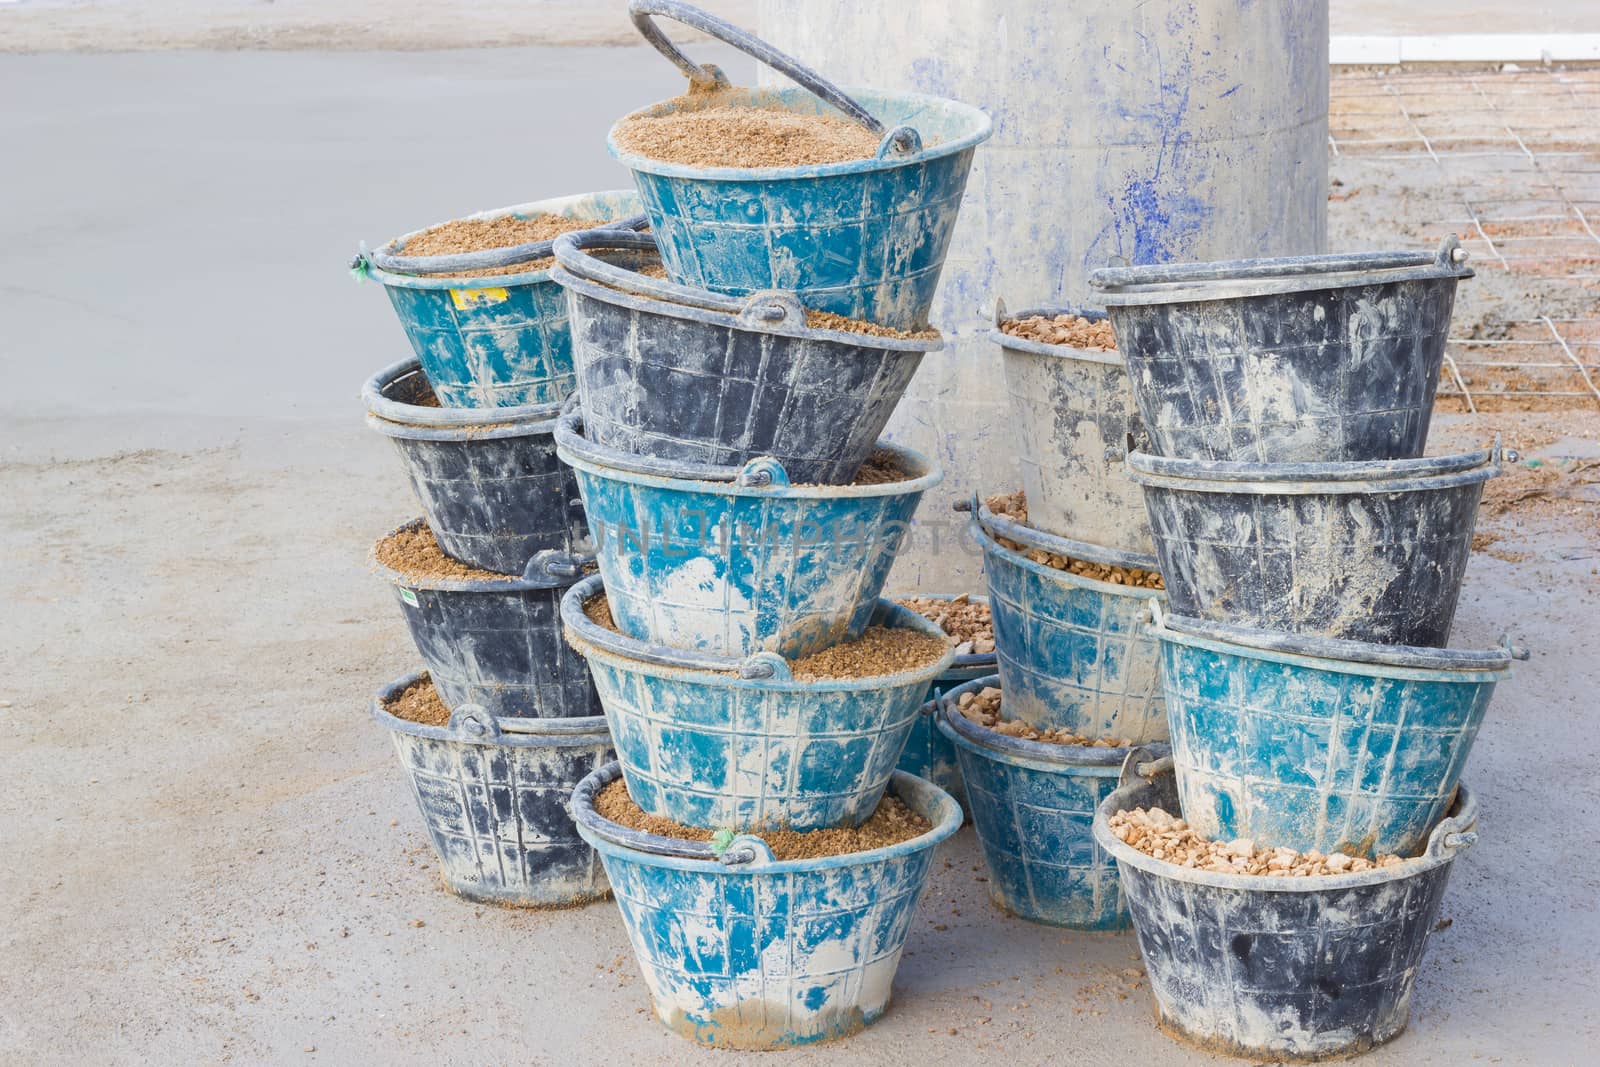 sand in many buckets prepared for mixing cement or concrete in construction site, horizontal photo.